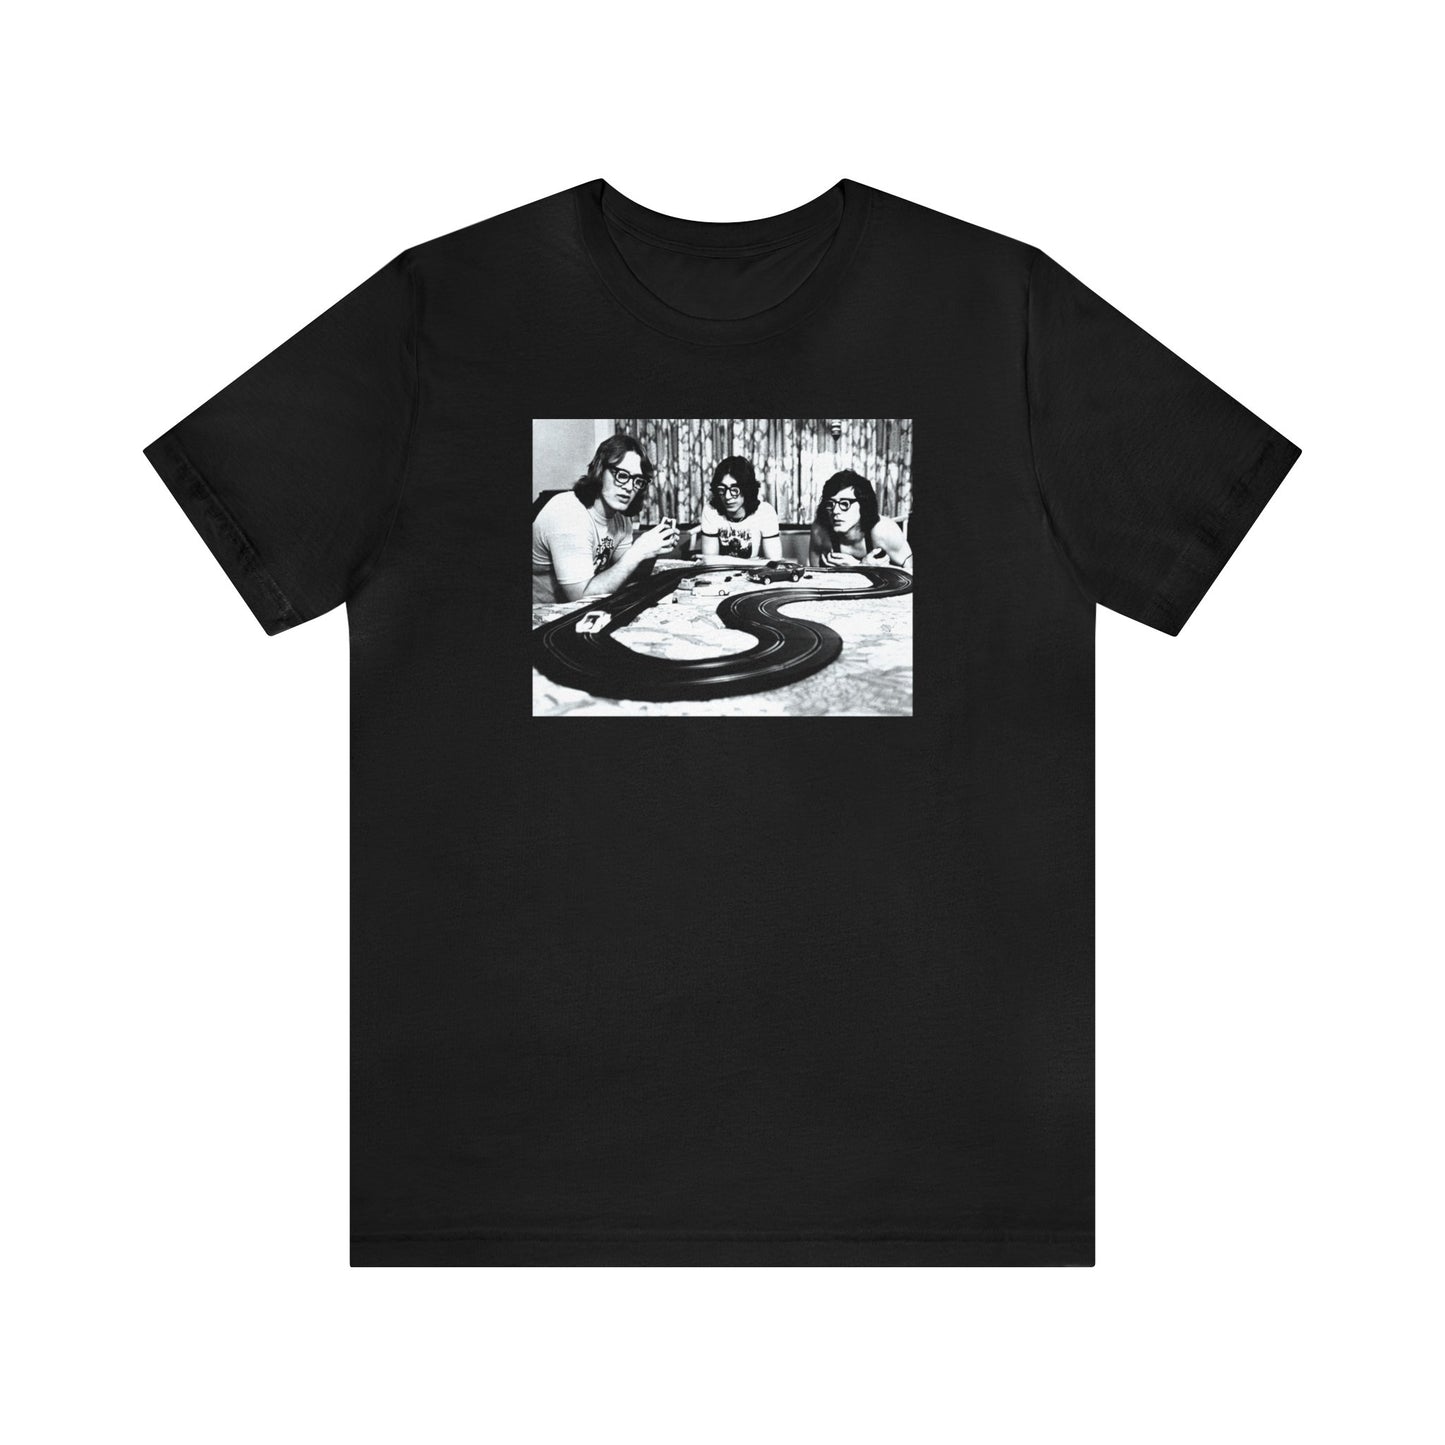 Slap Shot - They Brought Their F#ckin Toys Shirt